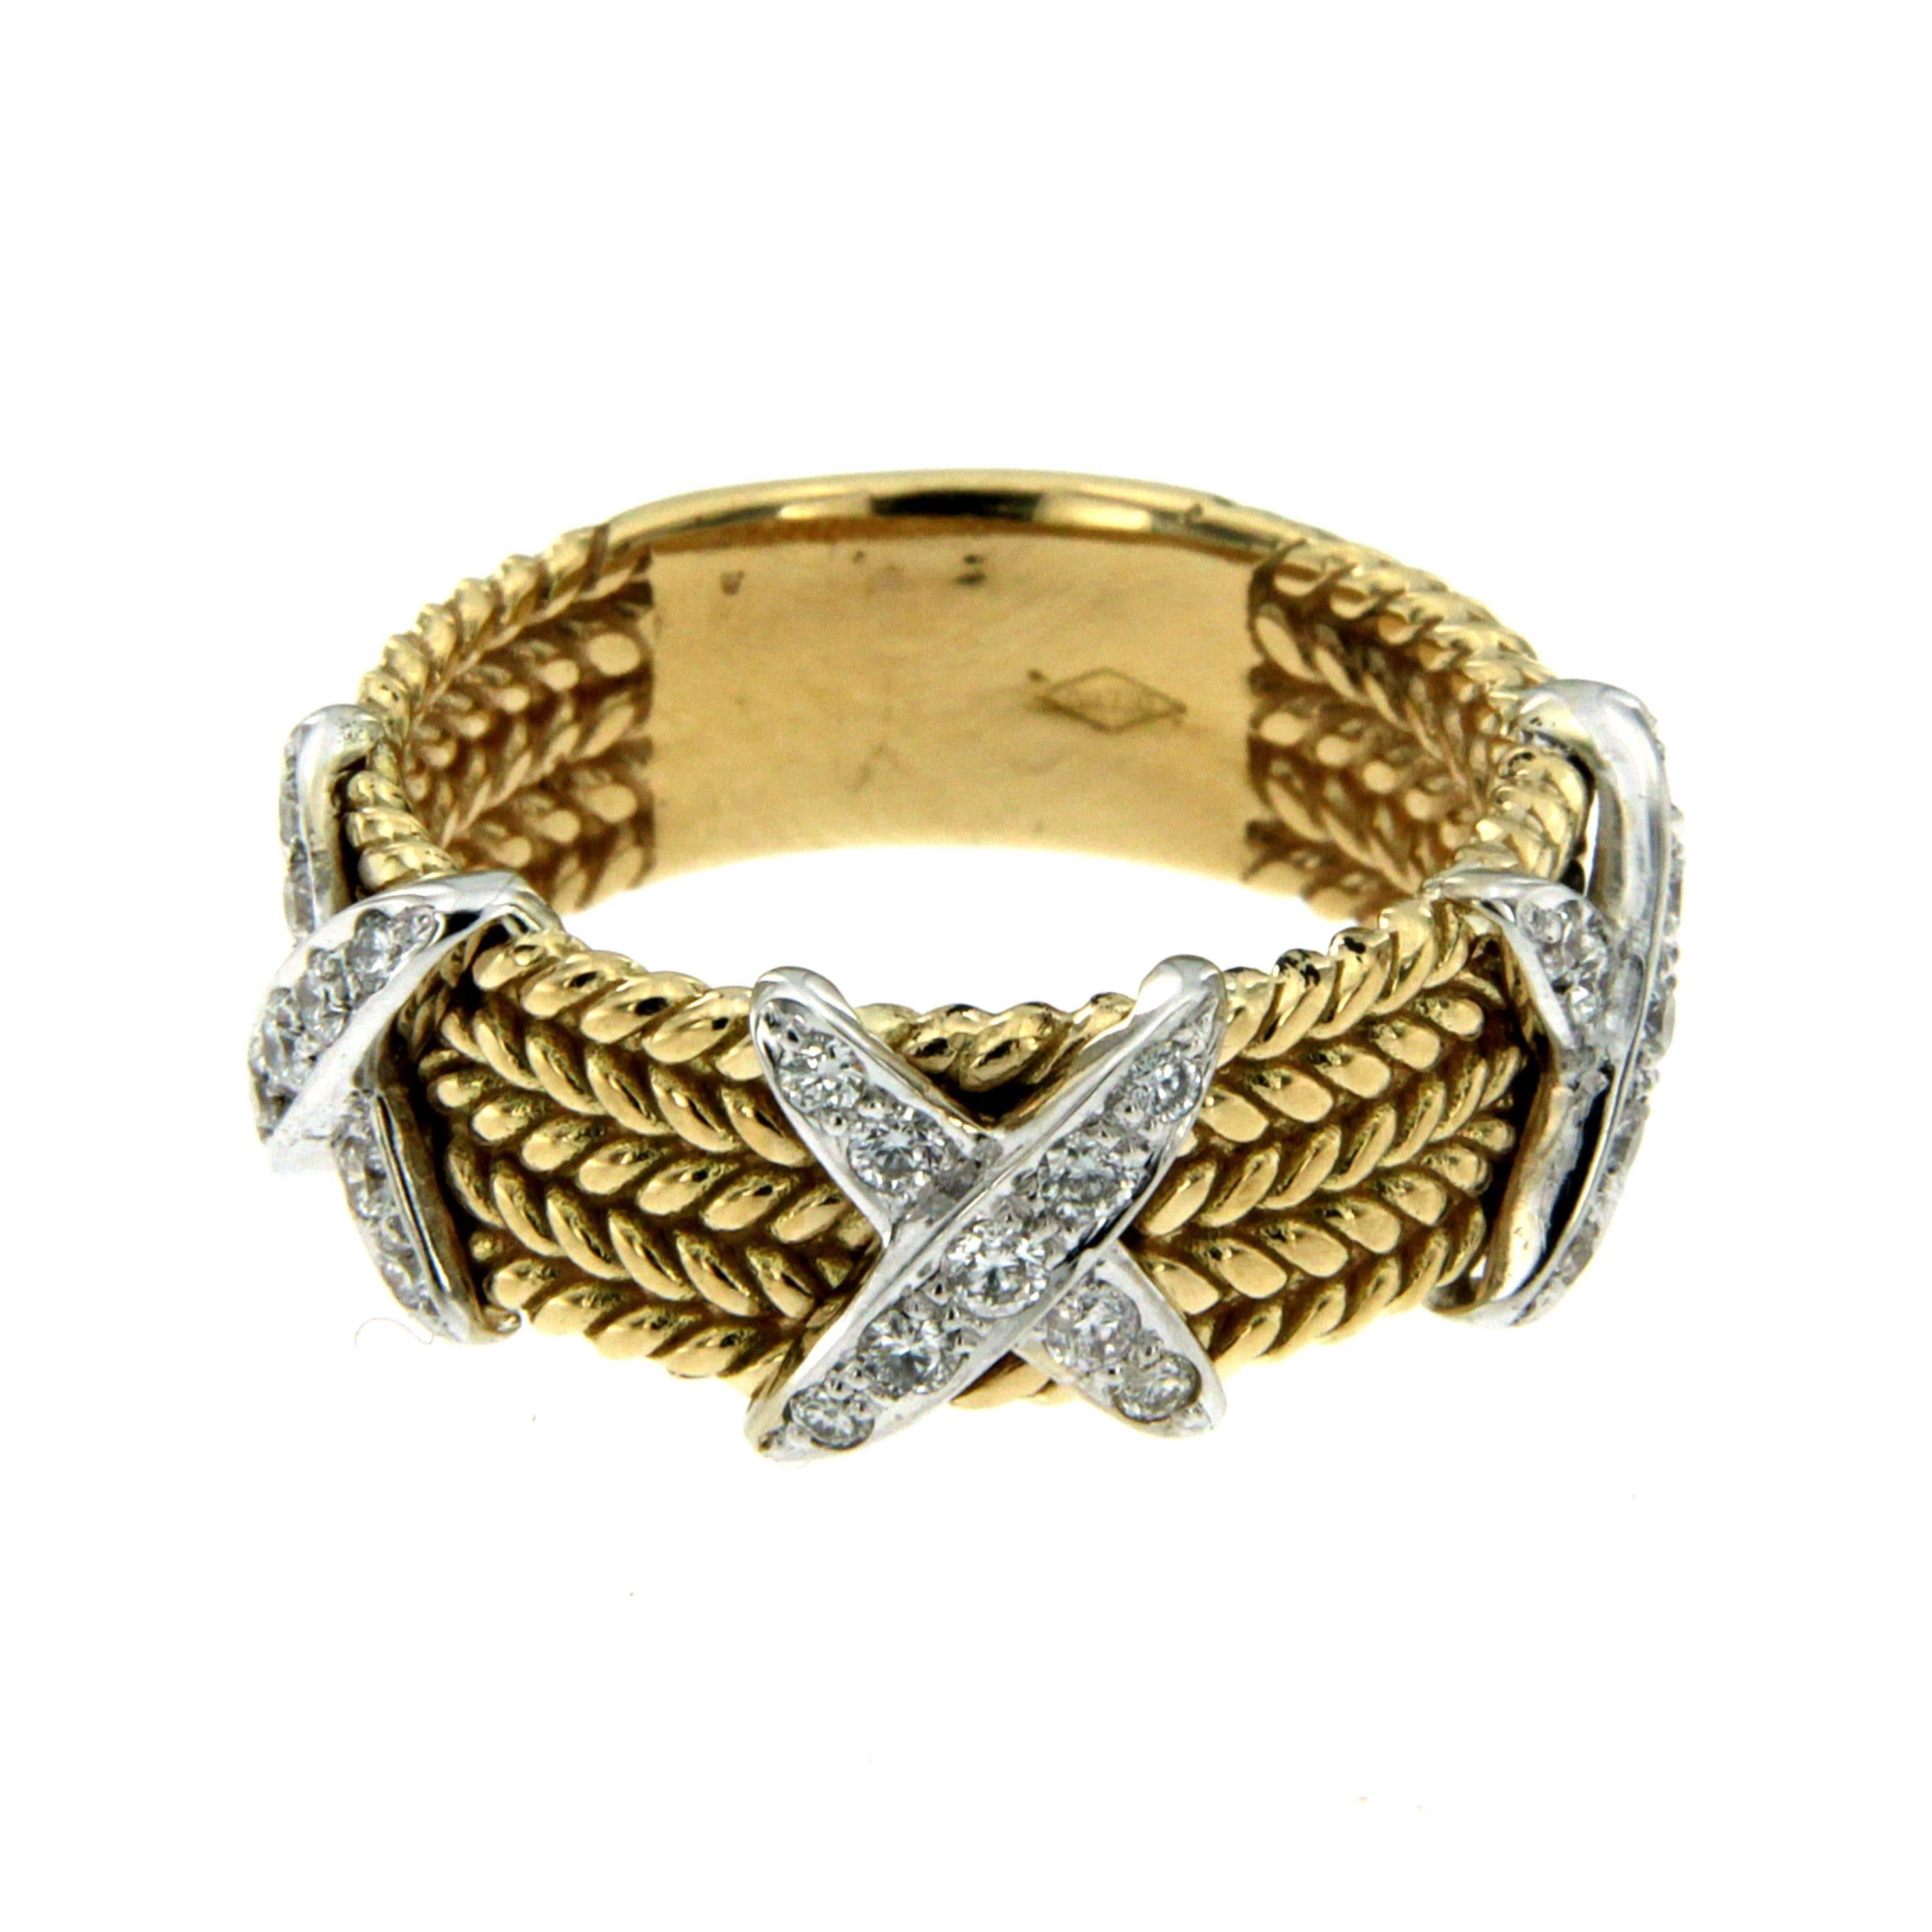 An 18 karat yellow gold ring composed of five rows of rope-twist design intersected by three X cross motifs. Each white gold cross is set with round brilliant cut diamonds weighing a total of 0.40ct, G colour and VVS clarity. 

CONDITION: Brand New